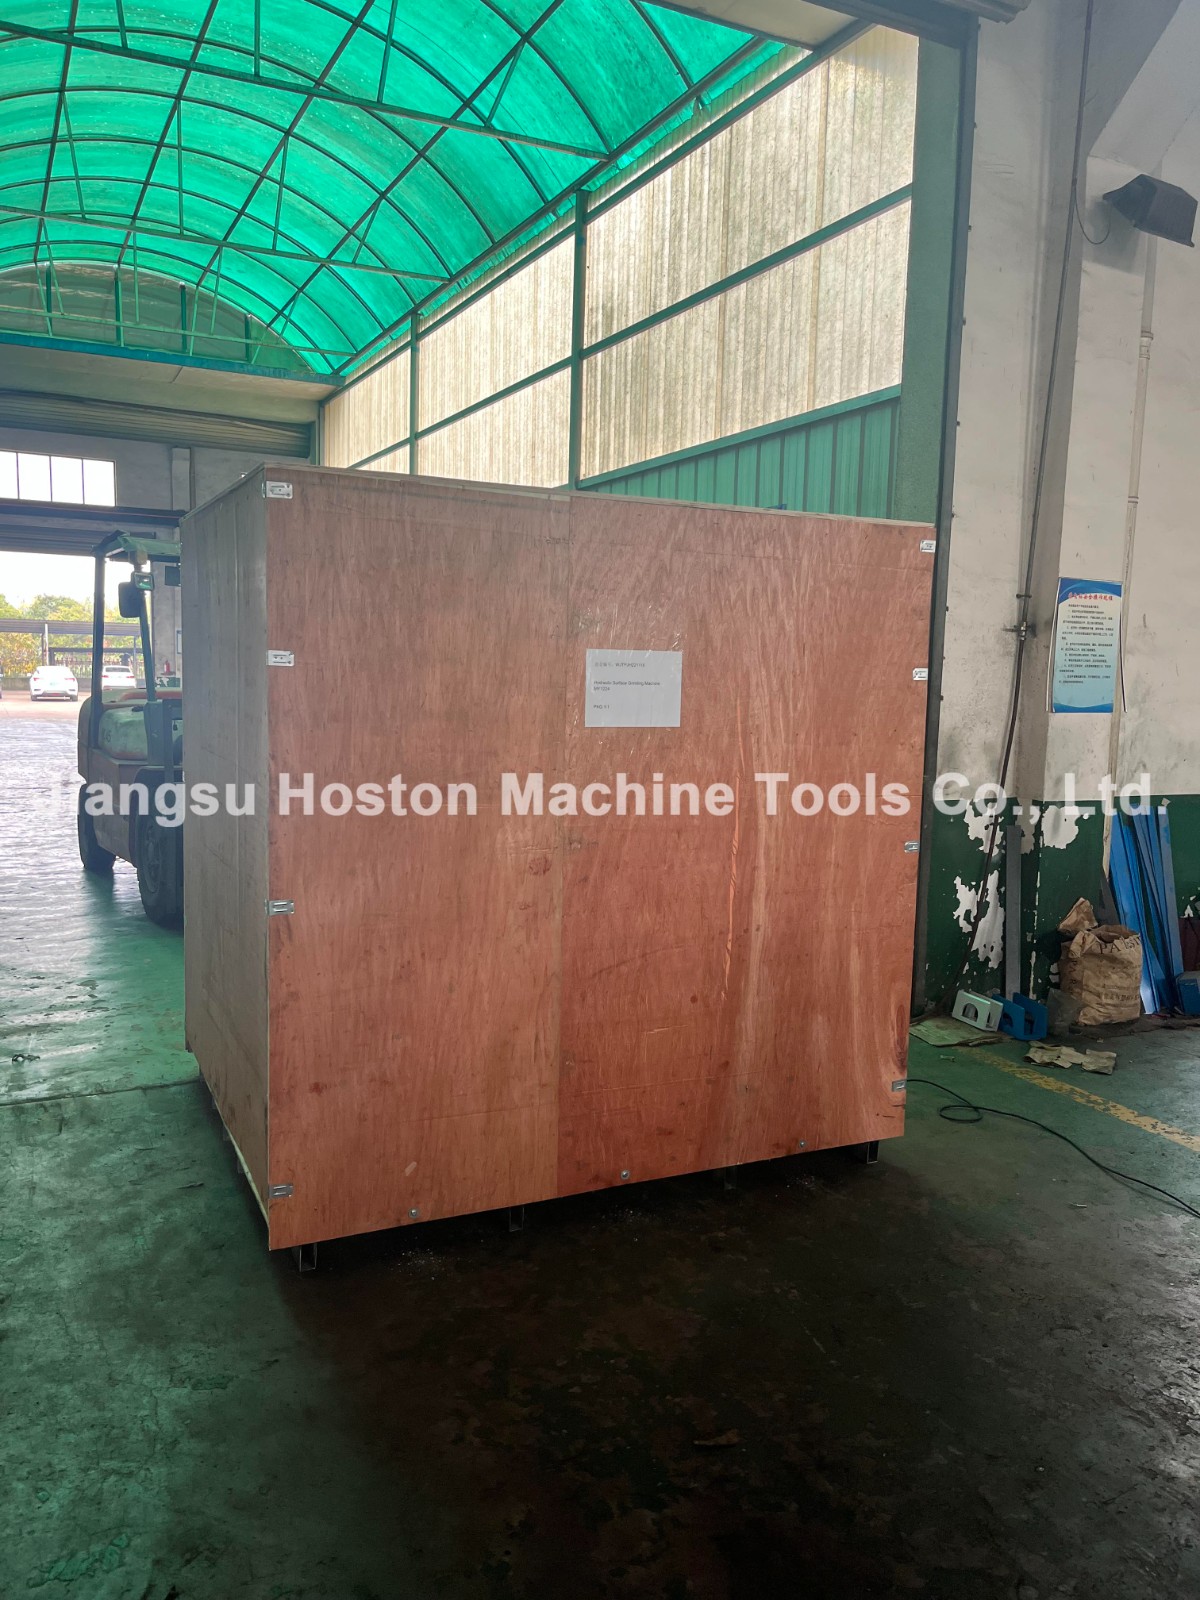 Hoston Surface Grinding Machine MY1224 is finished packing, waiting for delivery.